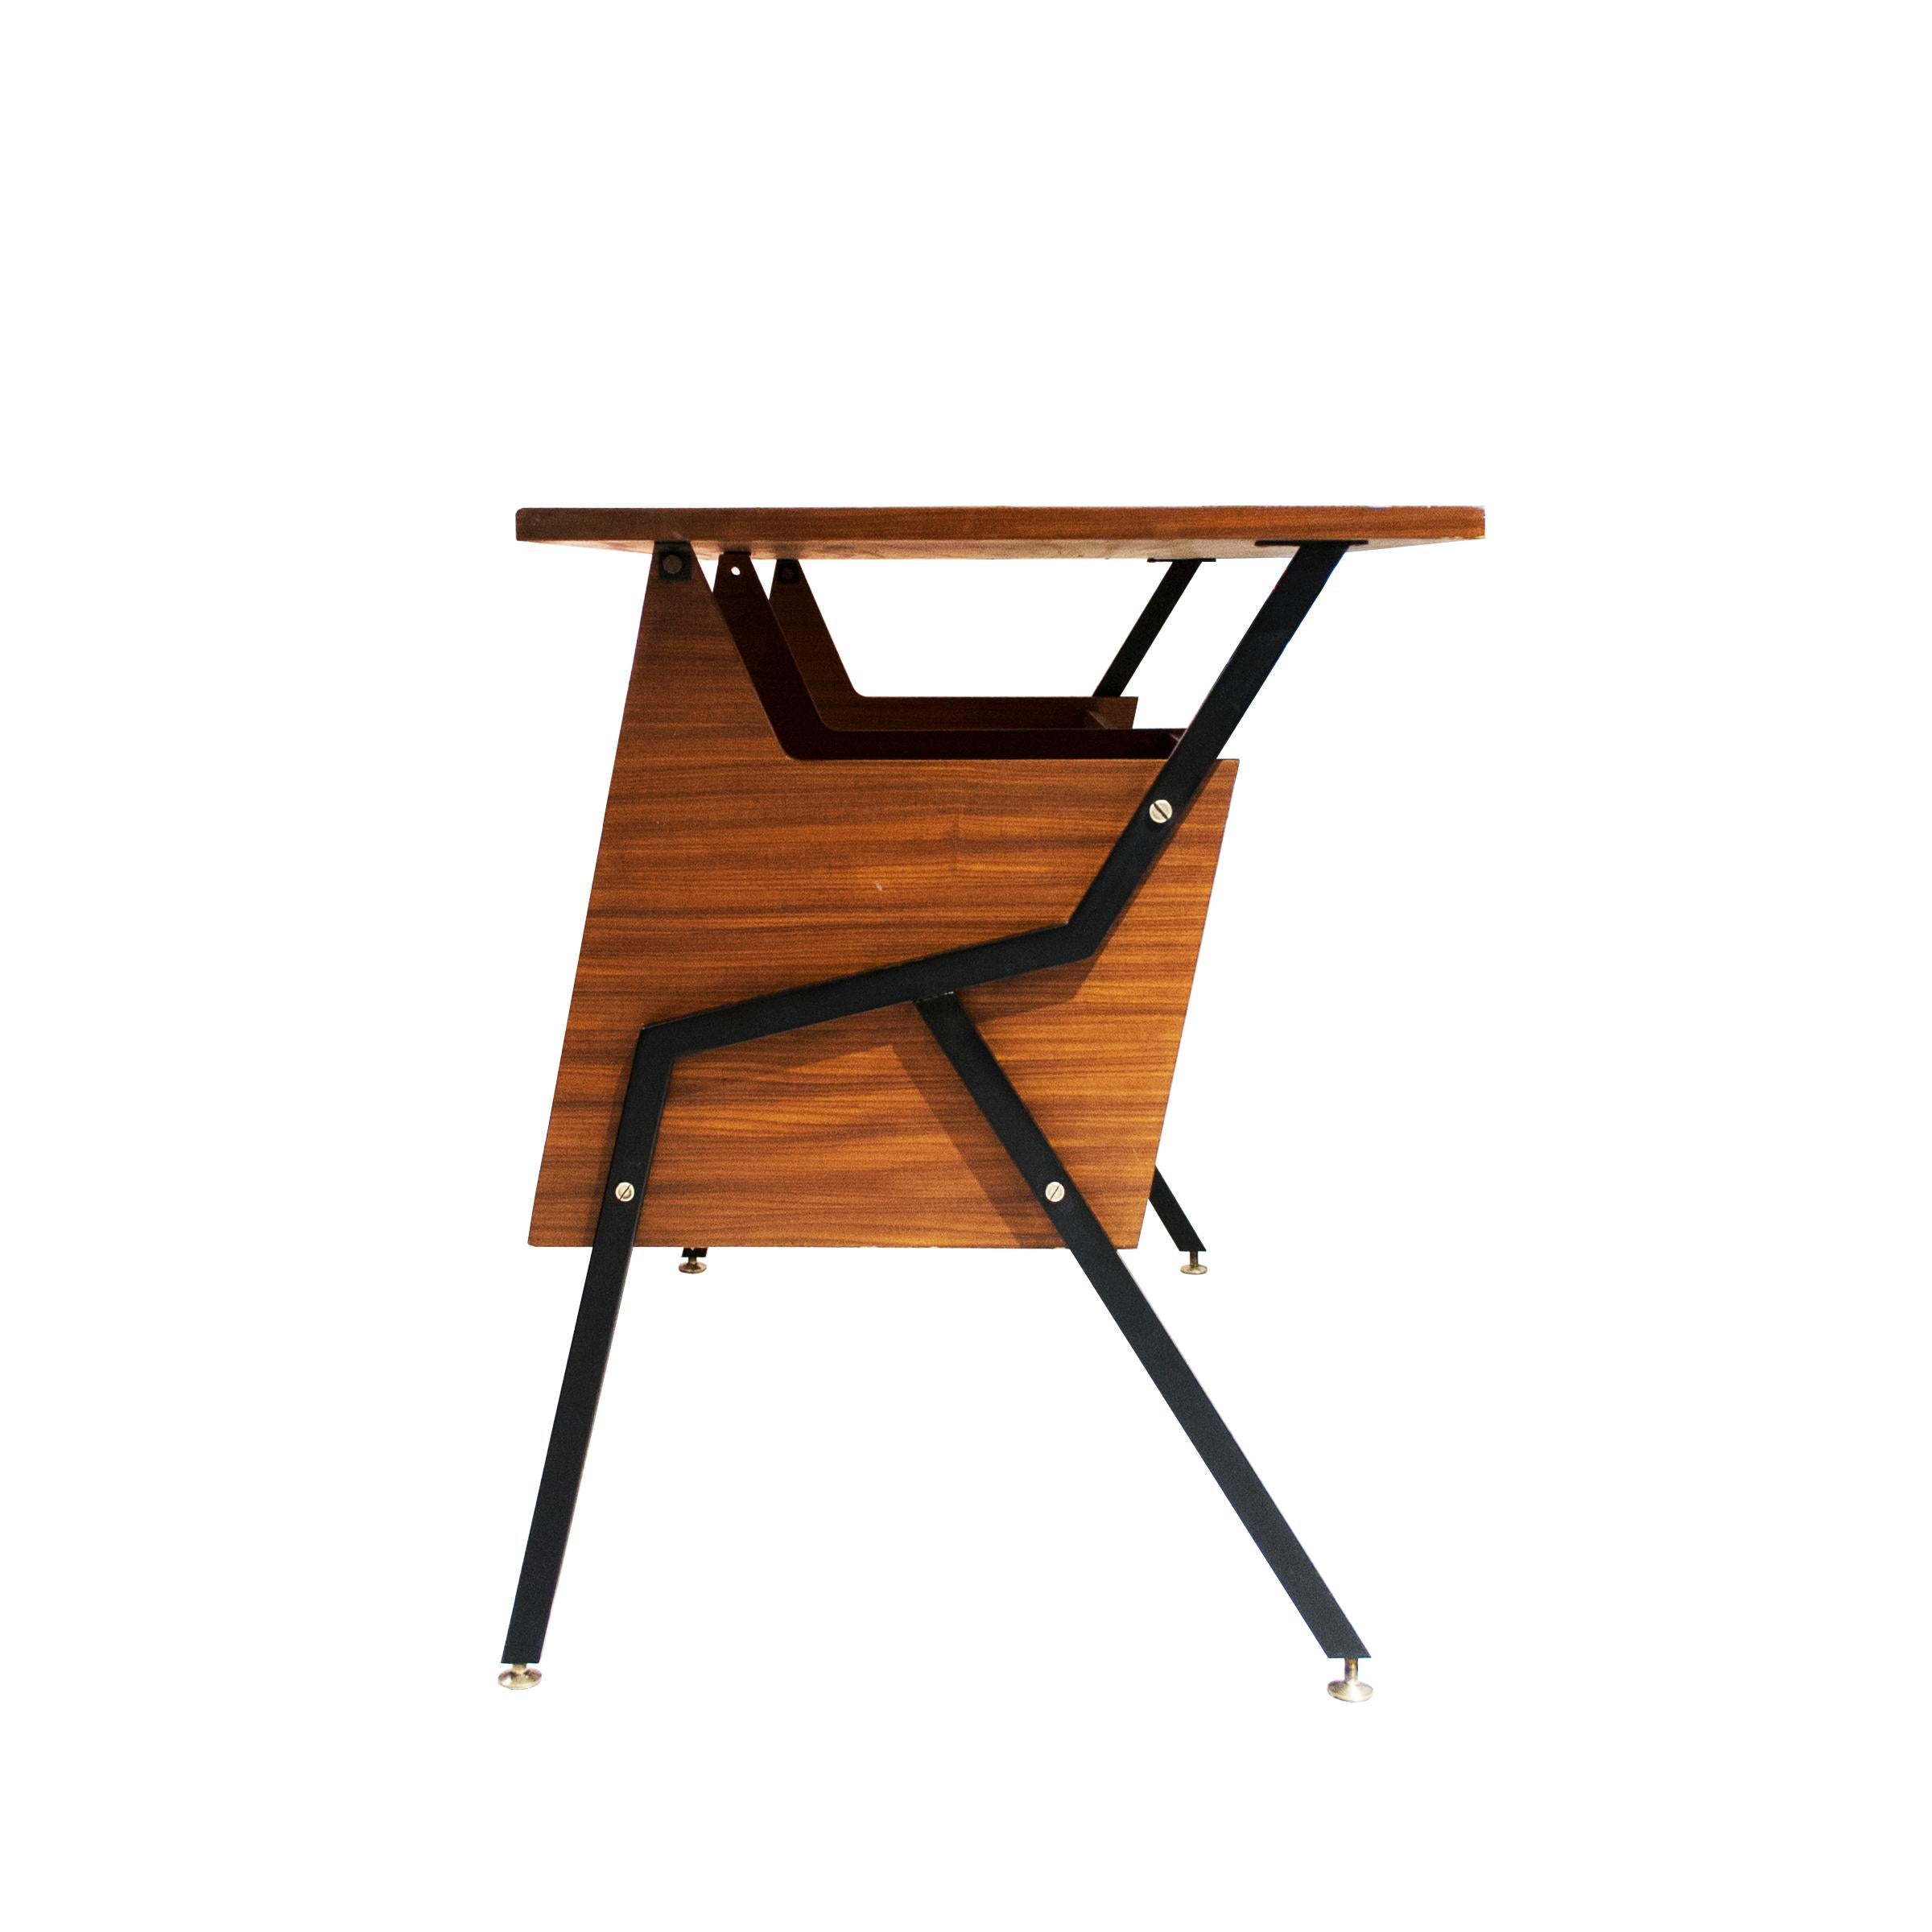 Mid-Century Modern Italian desk made of teak wood supported by a geometrical angled structure of black lacquered iron with brass details. The desk is compossed of front and lateral wood panels with a drawer module on the right side and a table top.